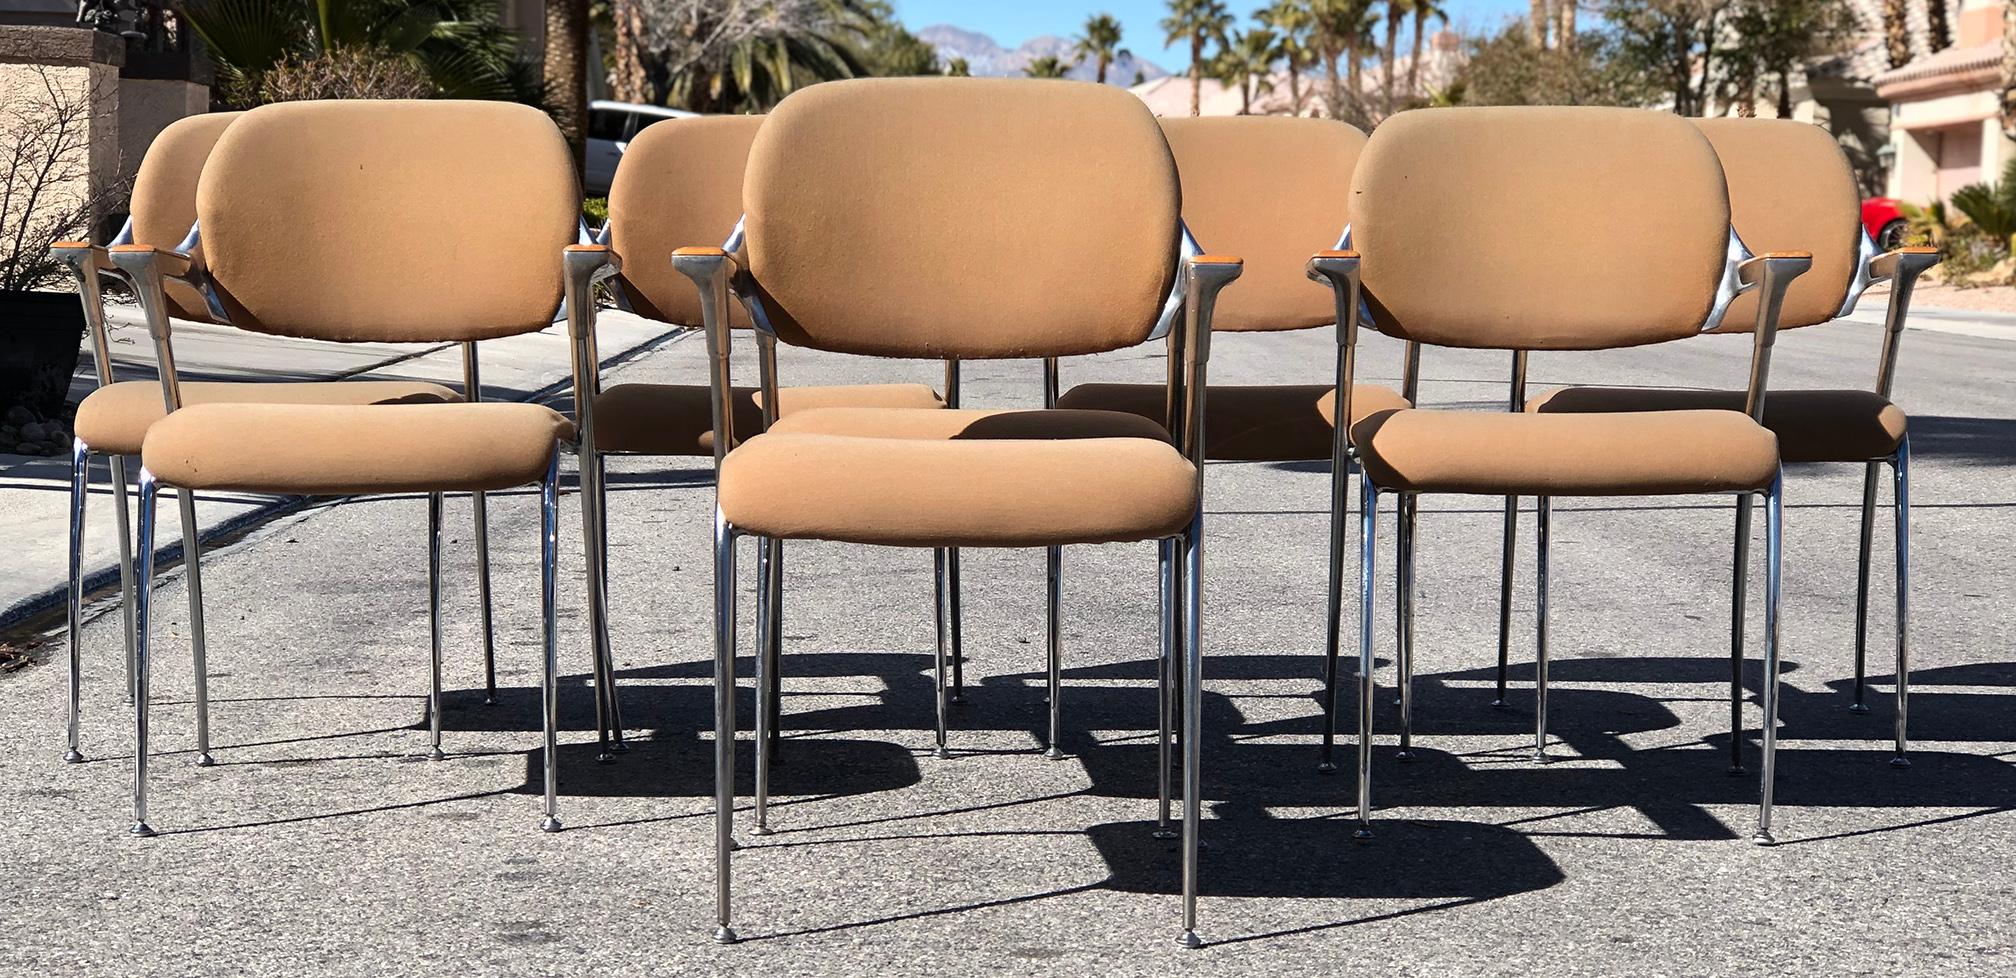 Very reminiscent of the style of Shelby William's Gazelle chairs, these Thonet chairs designed by Francesco Zaccone for Thonet in the 1970s are curvy, sleek and attractive from almost any angle. These chairs are upholstered in a tan cloth fabric.